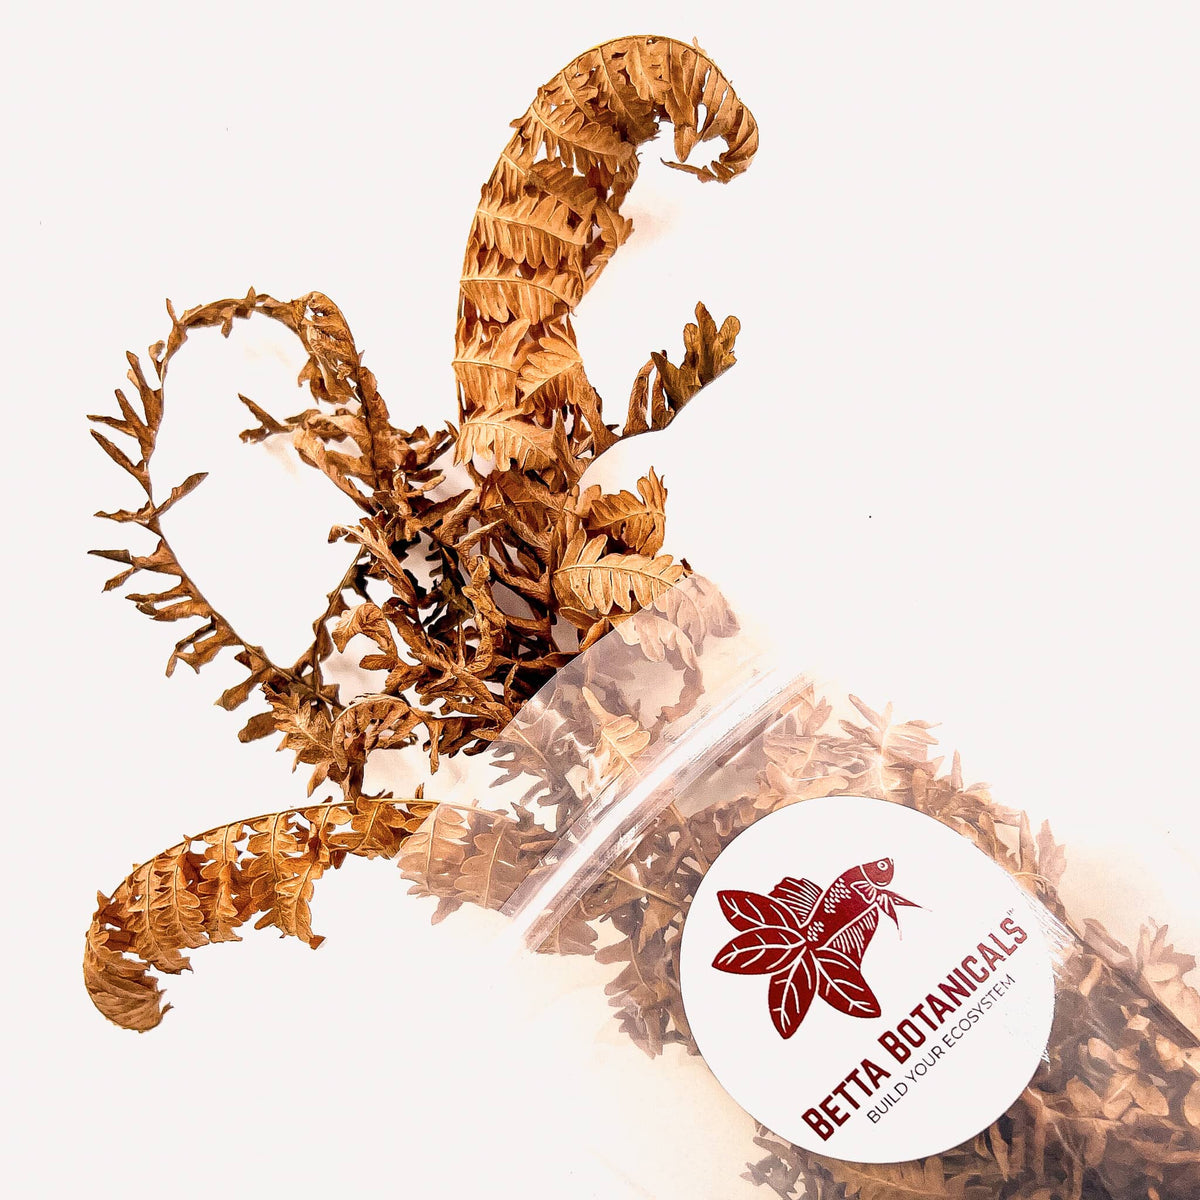 Fern frond leaf litter in clear sustainable packaging by Betta Botanicals, aquarium botanicals for blackwater and biotope aquariums.